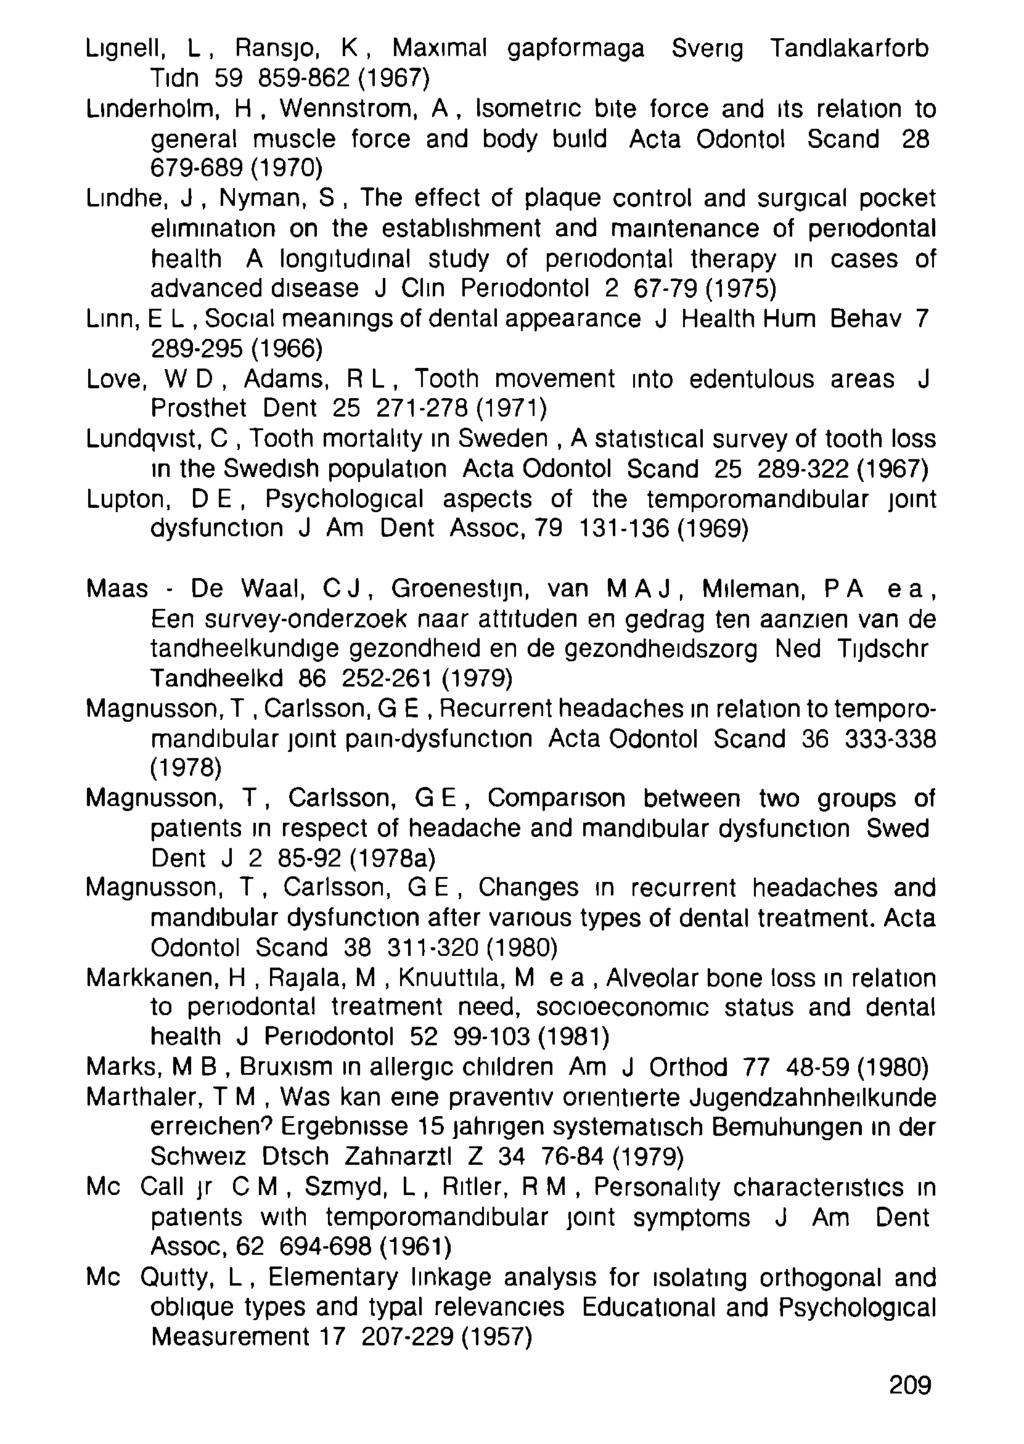 Lignell, L, Ransjo, К, Maximal gapformaga Sveng Tandlakarforb Tidn 59 859-862(1967) Linderholm, H, We η η st rom, A, Isometric bite force and its relation to general muscle force and body build Acta